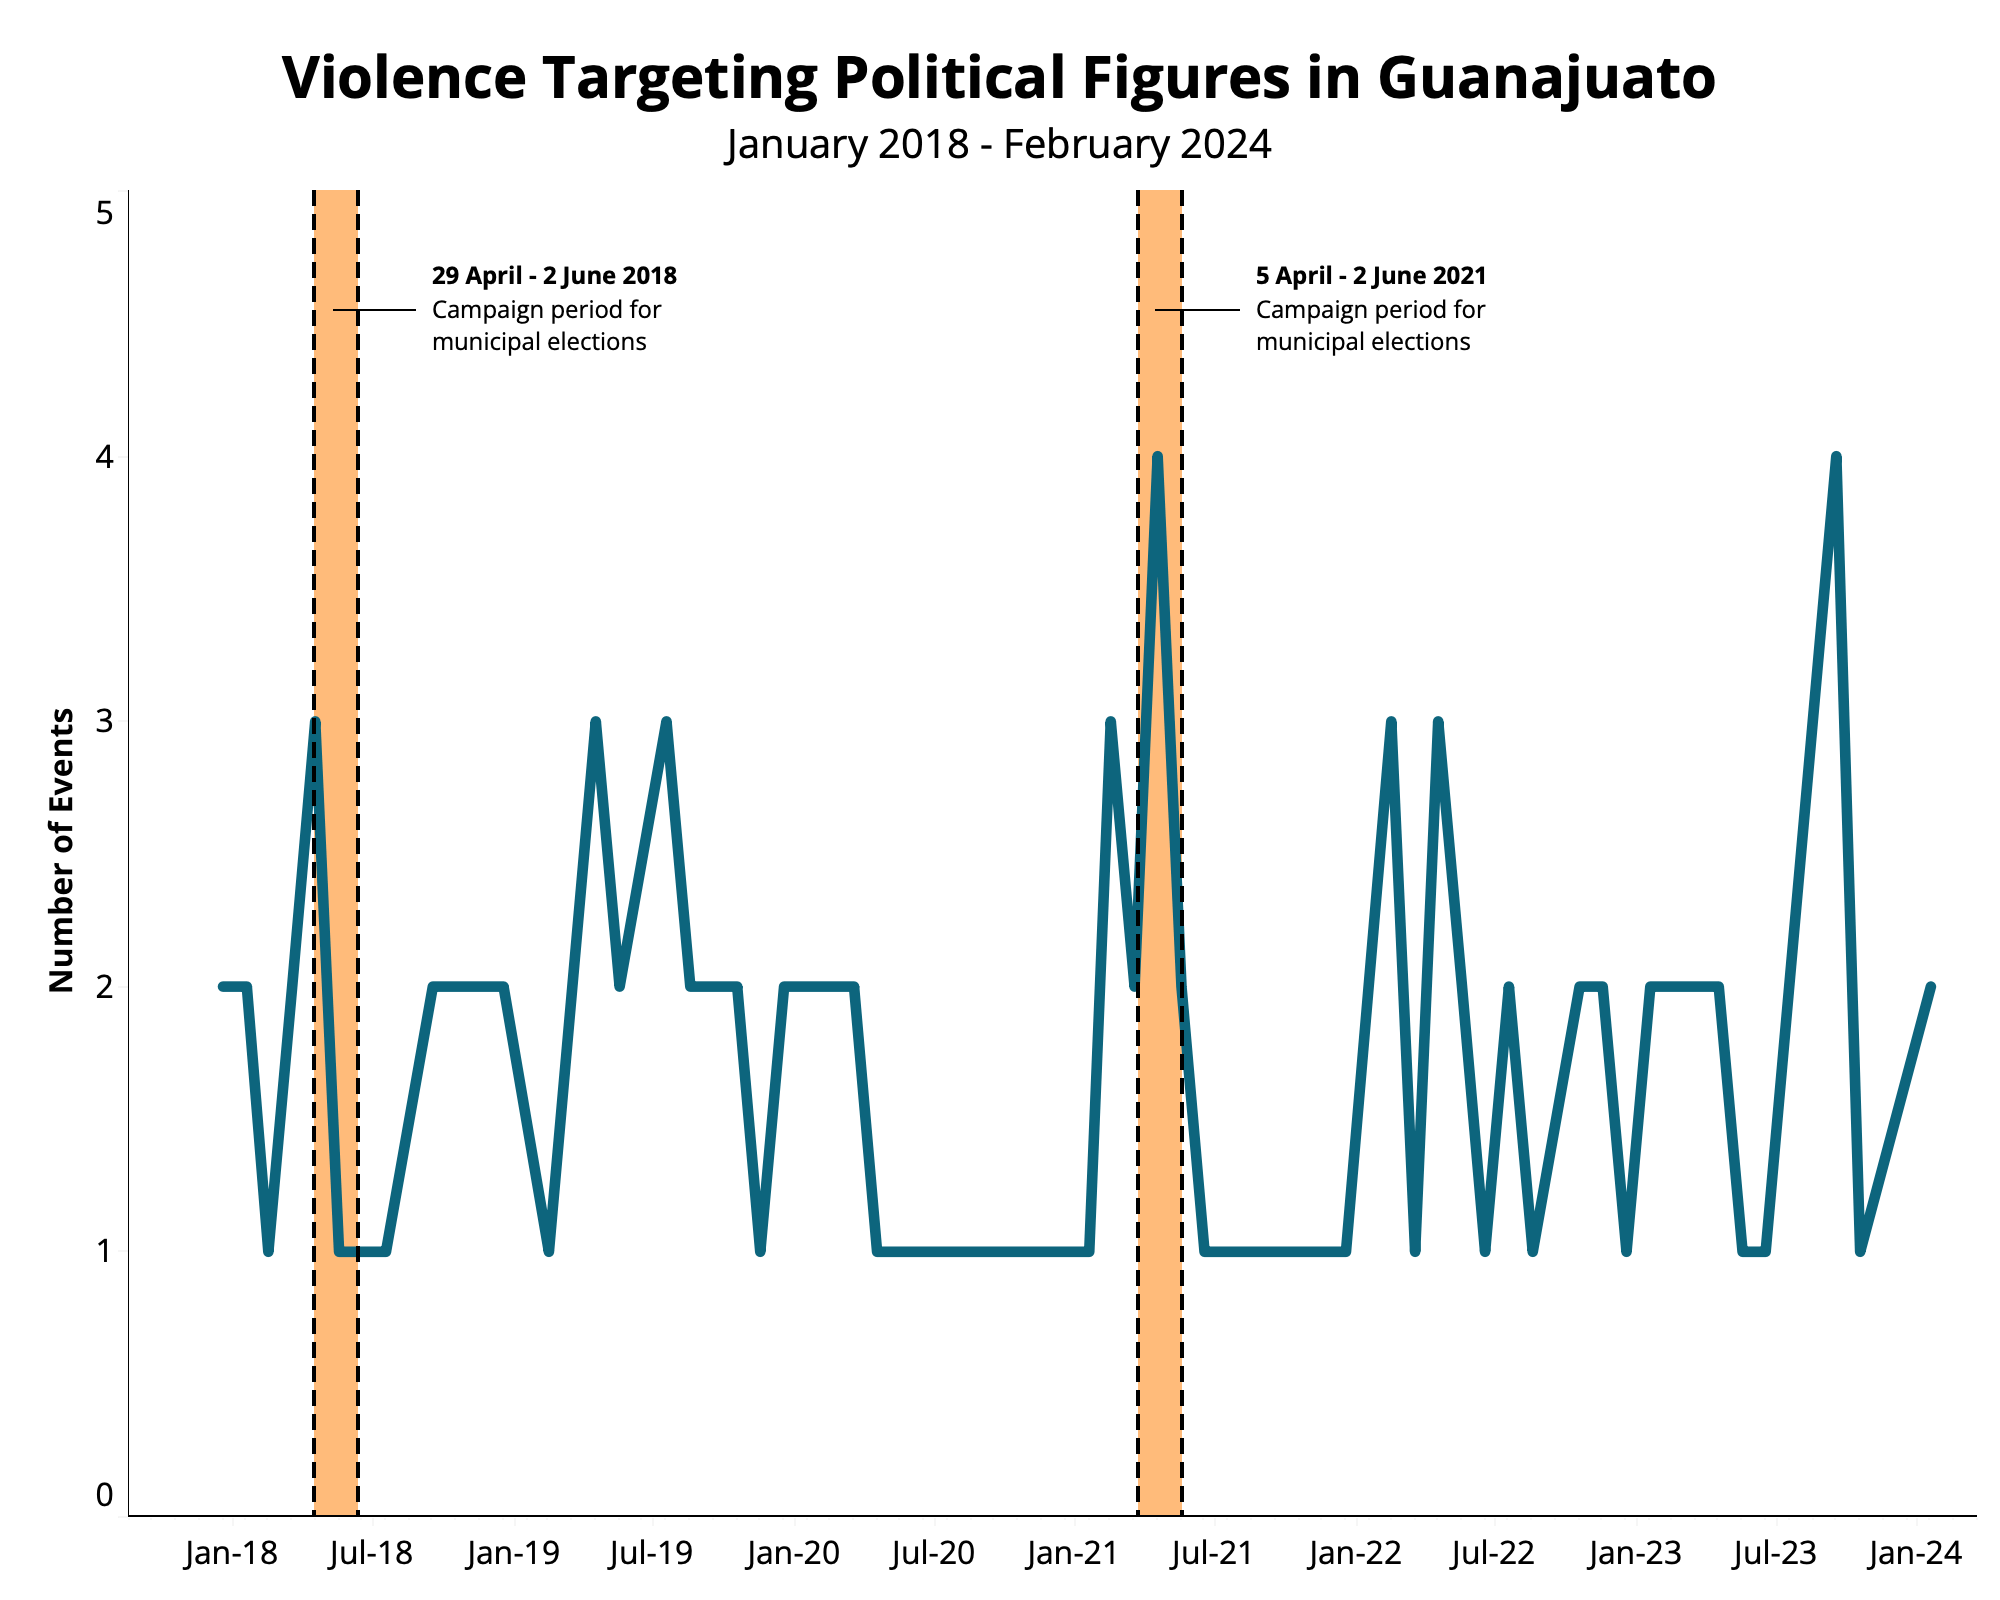 Violence targeting political figures in Guanajuato